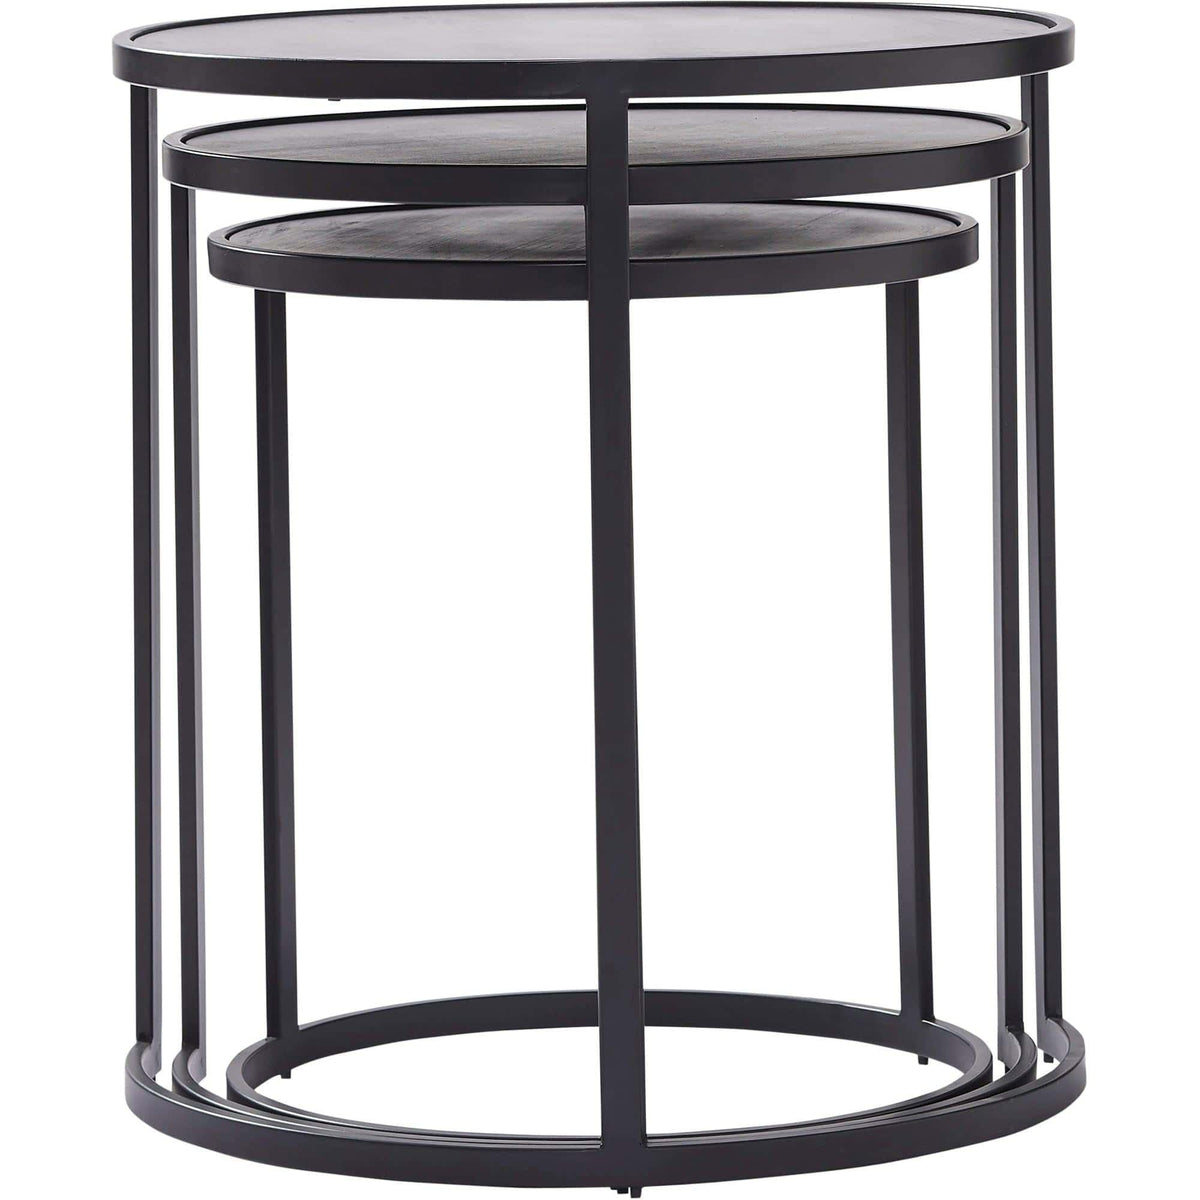 Renwil - Donatella Set of 3 Nested Tables - TA429 | Montreal Lighting & Hardware